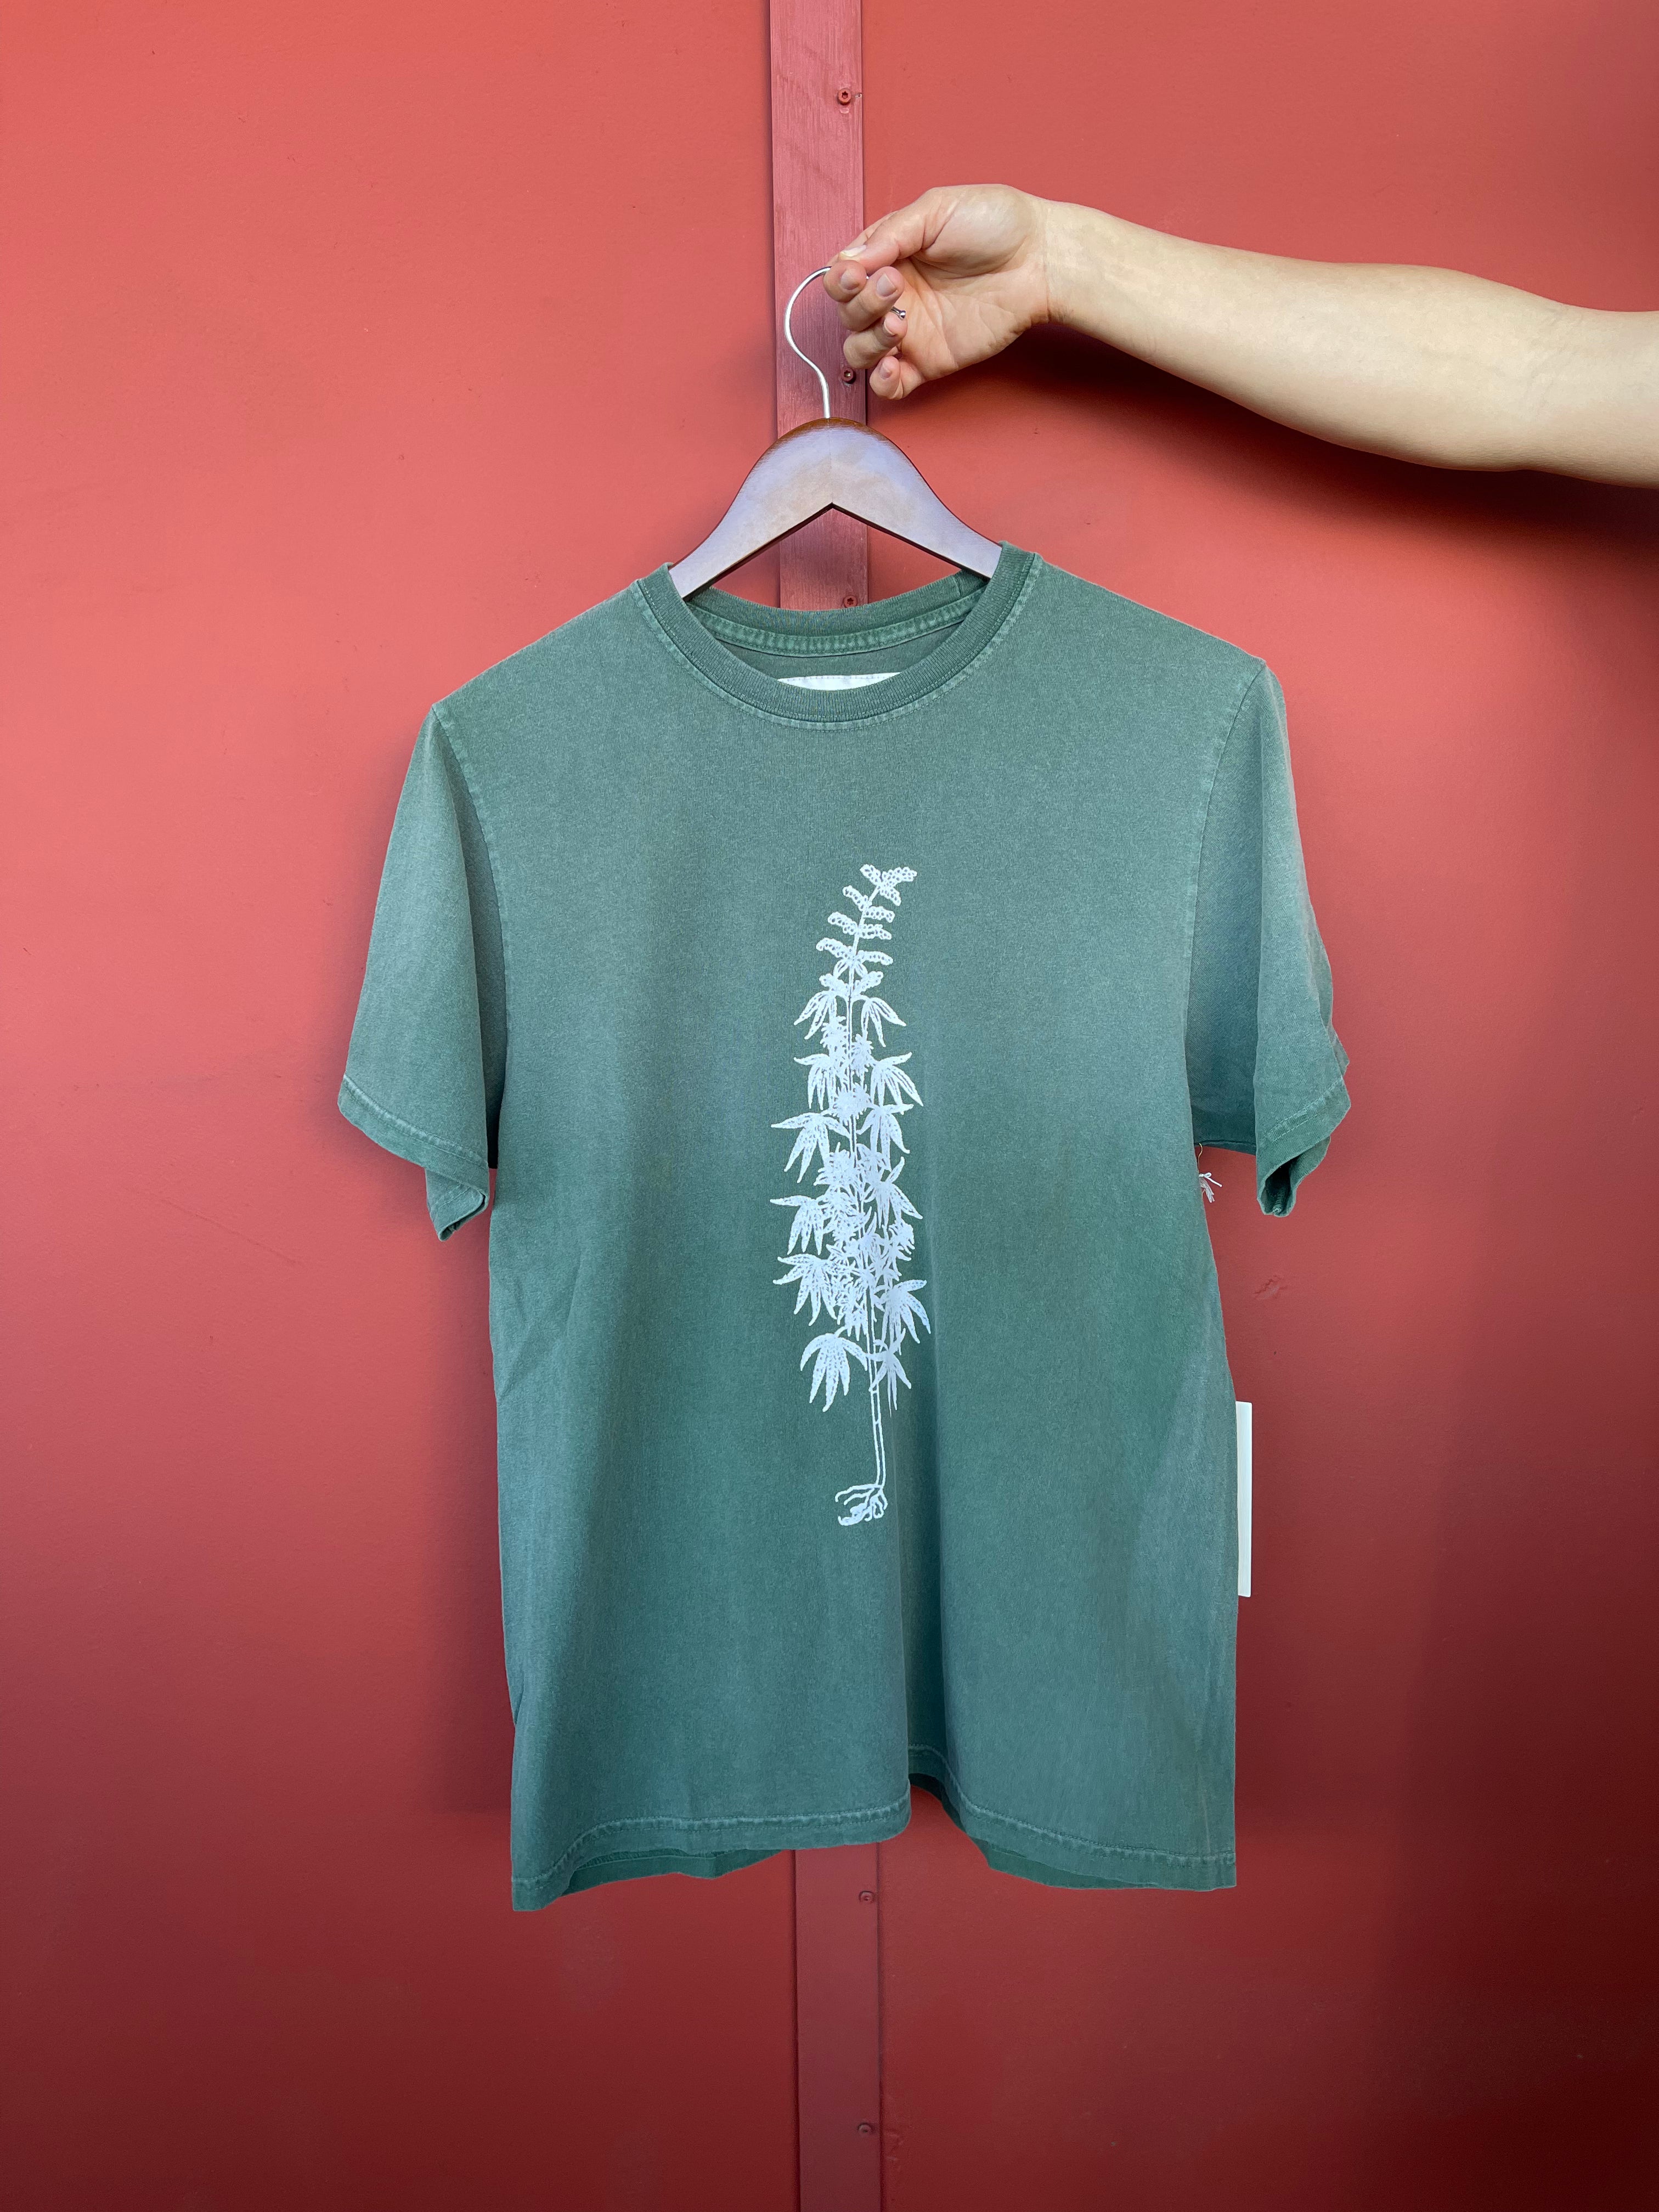 One of These Days - More Peace, More Freedom Tee Washed Forest Green